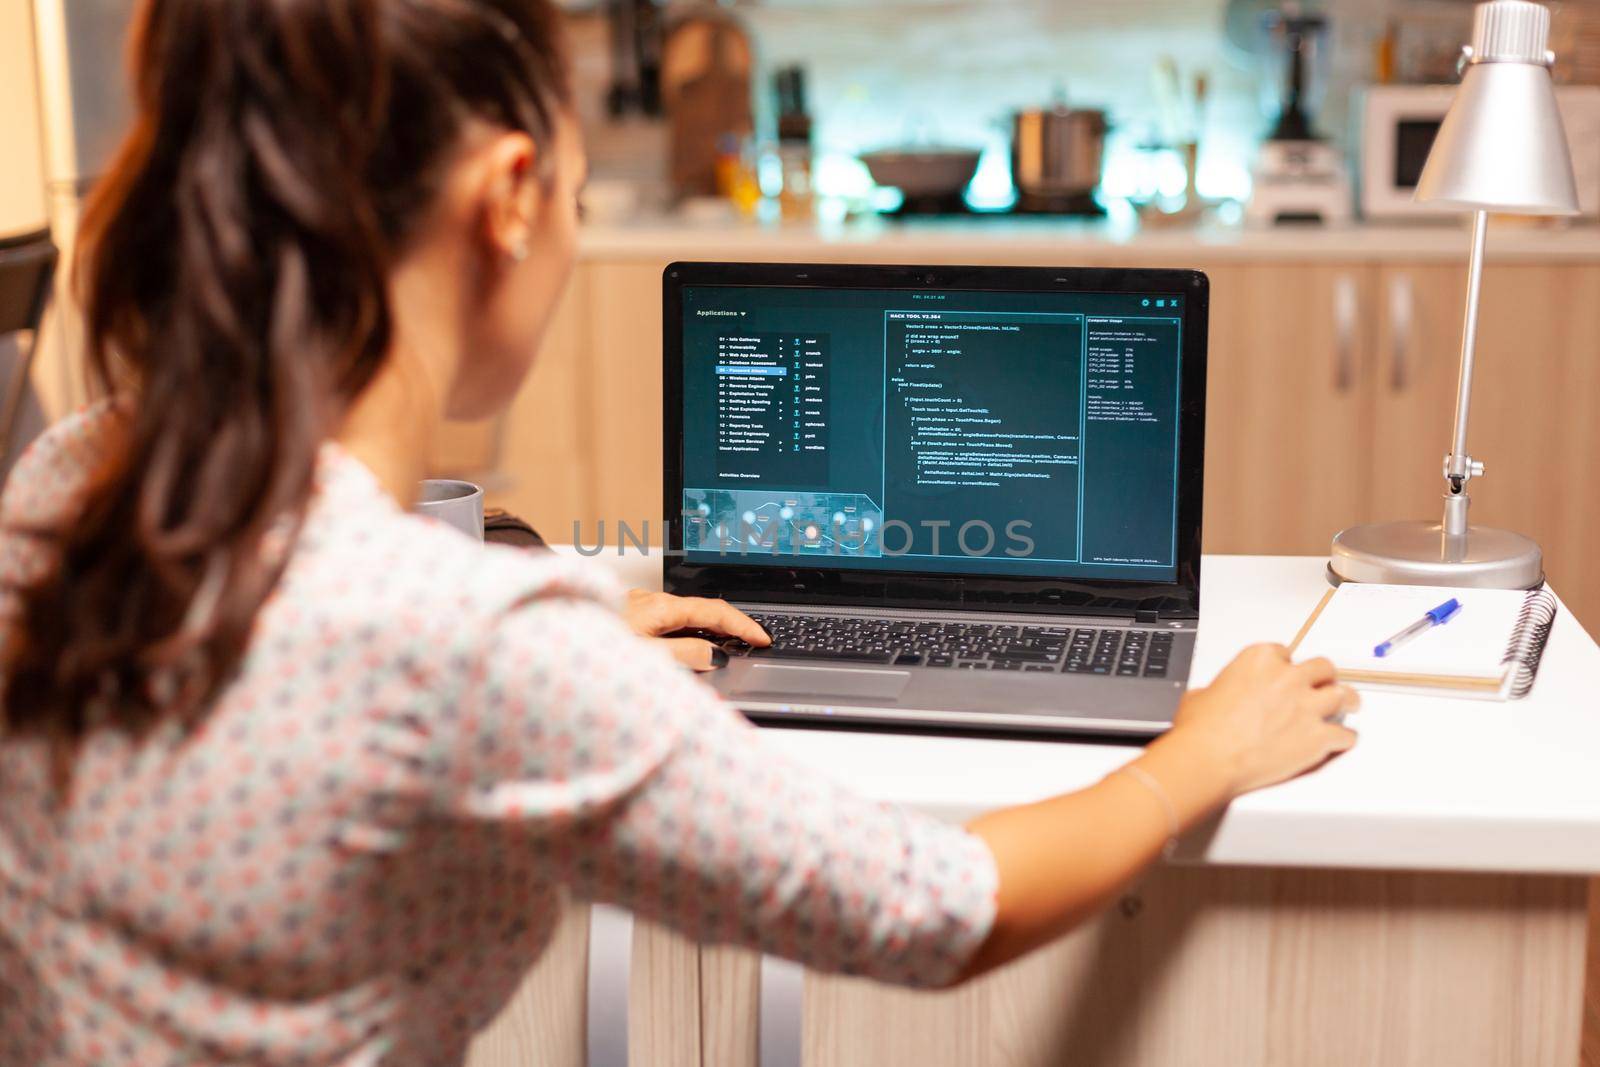 Female hacker sitting in front of computer and thinking how to fraud the government at night time. Programmer writing a dangerous malware for cyber attacks using performance laptop during midnight.